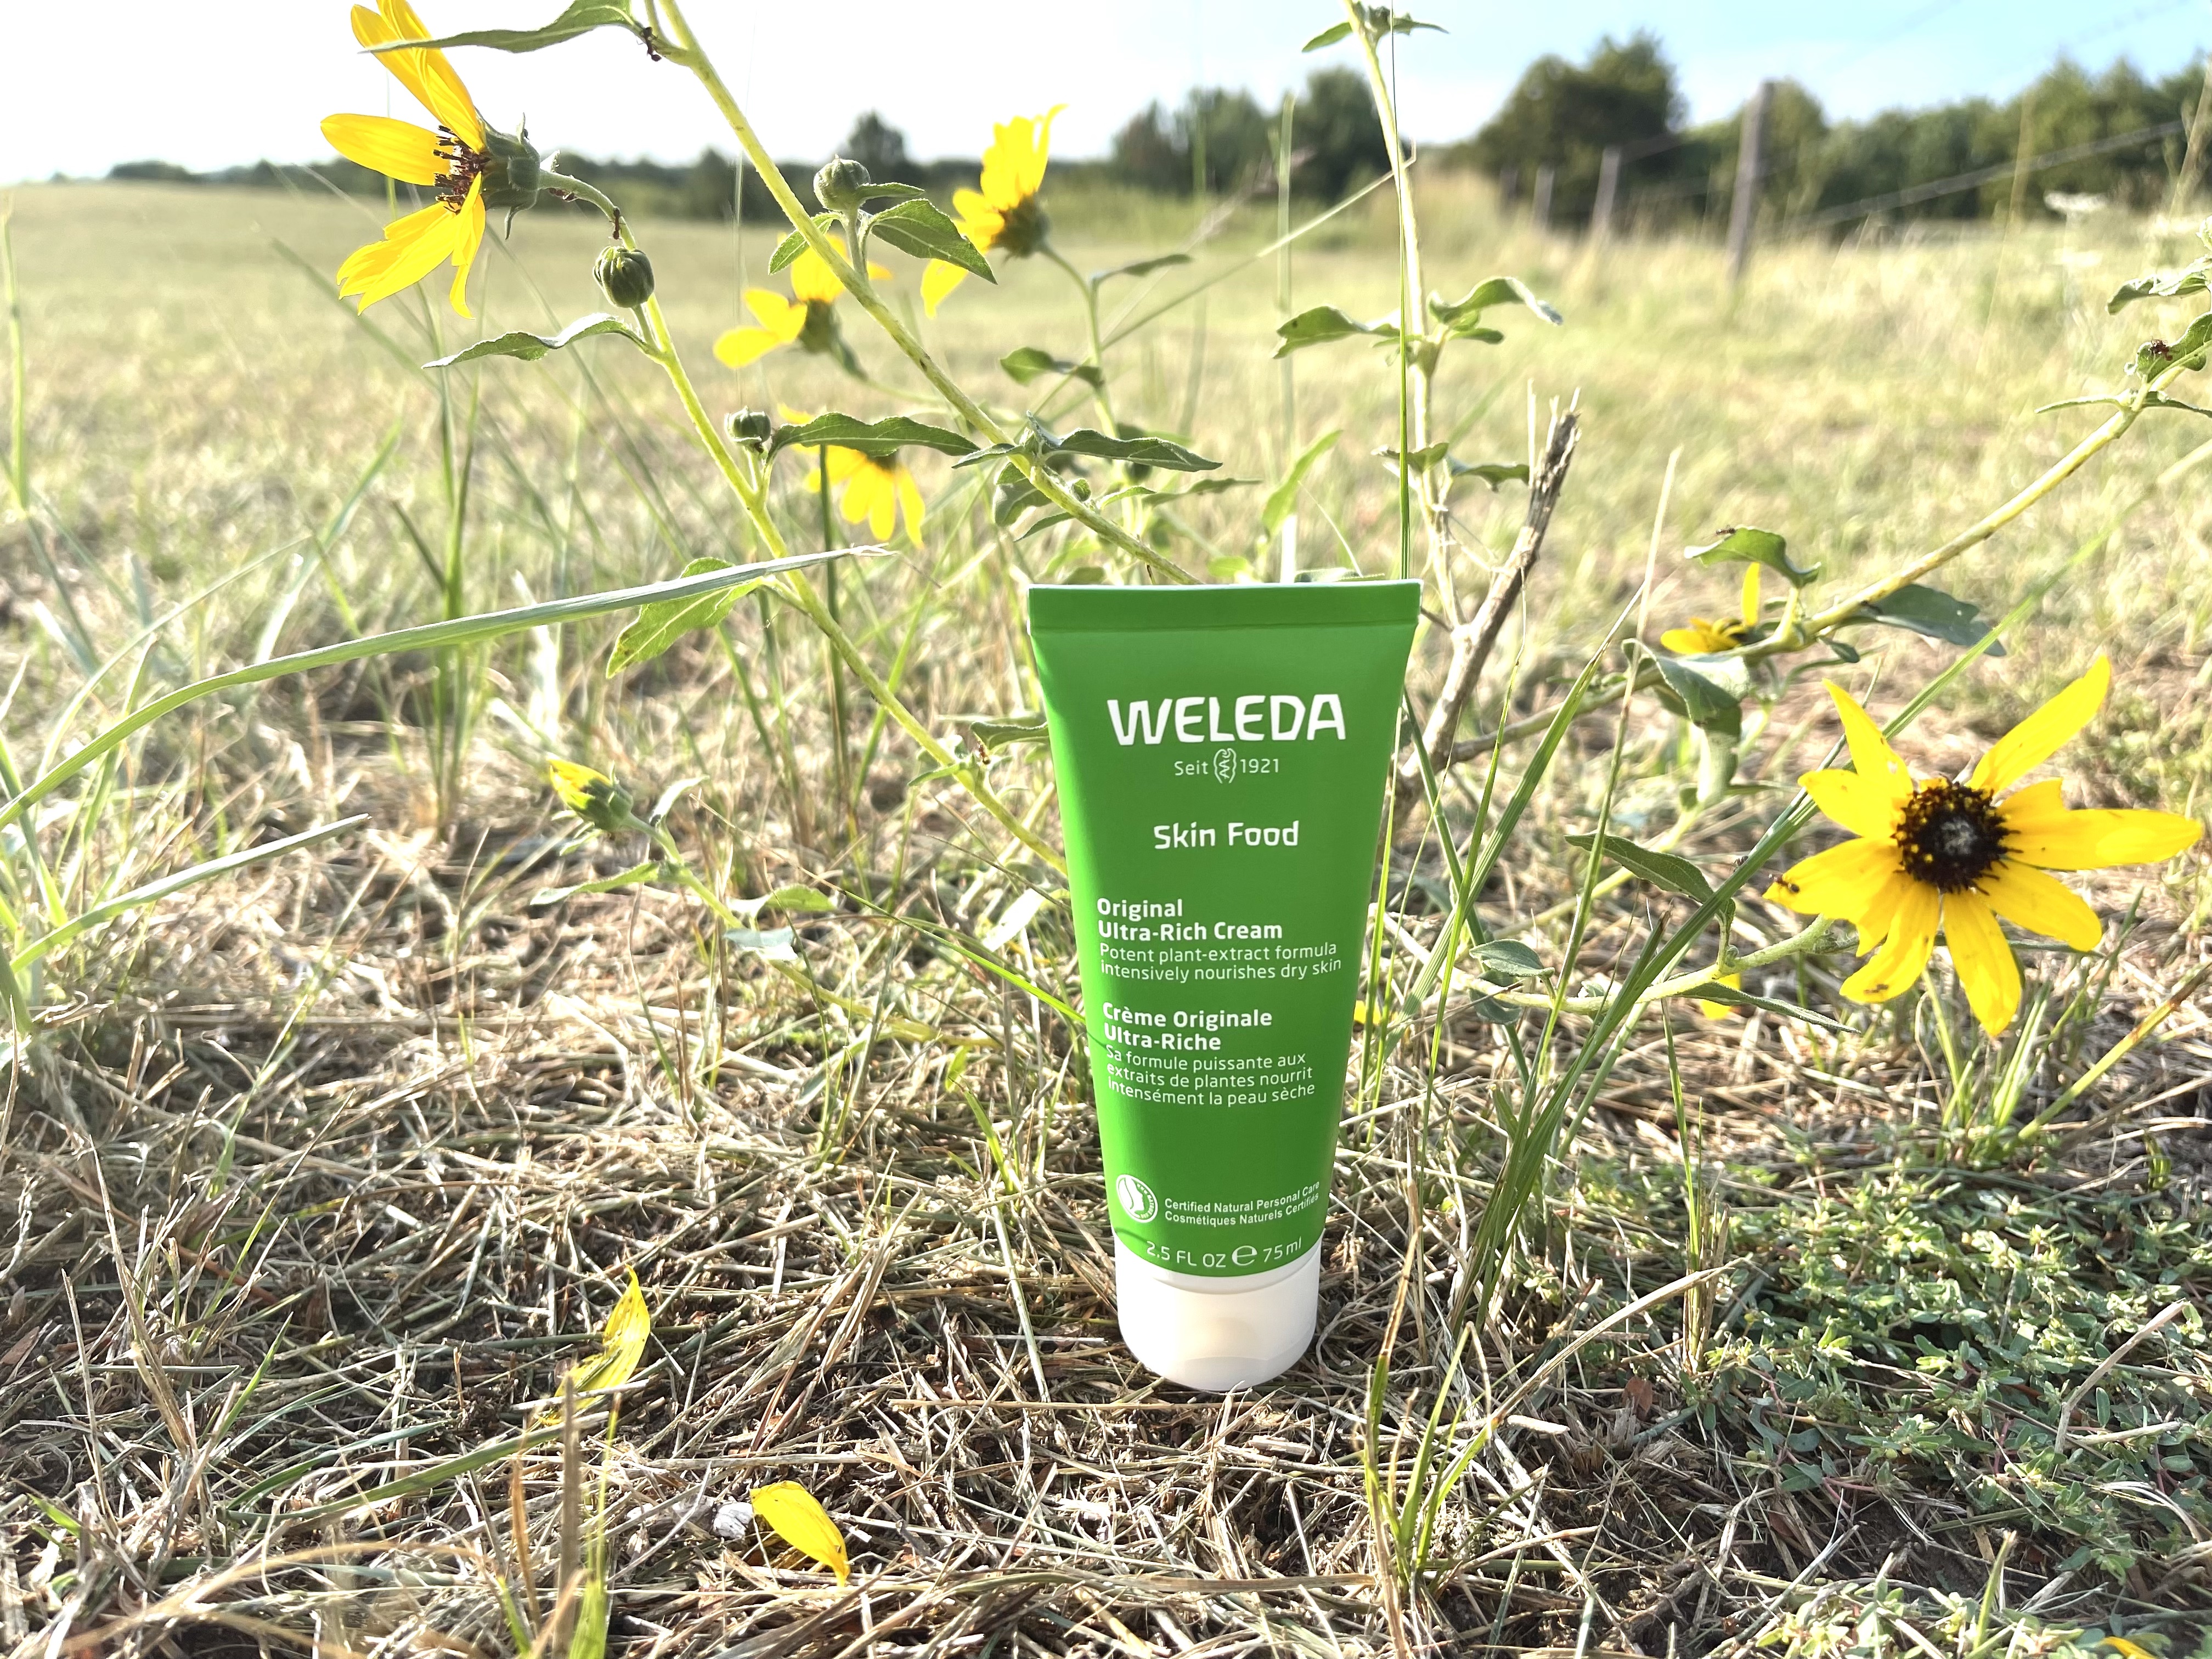 Image of Weleda Skin Food by grass and flowers